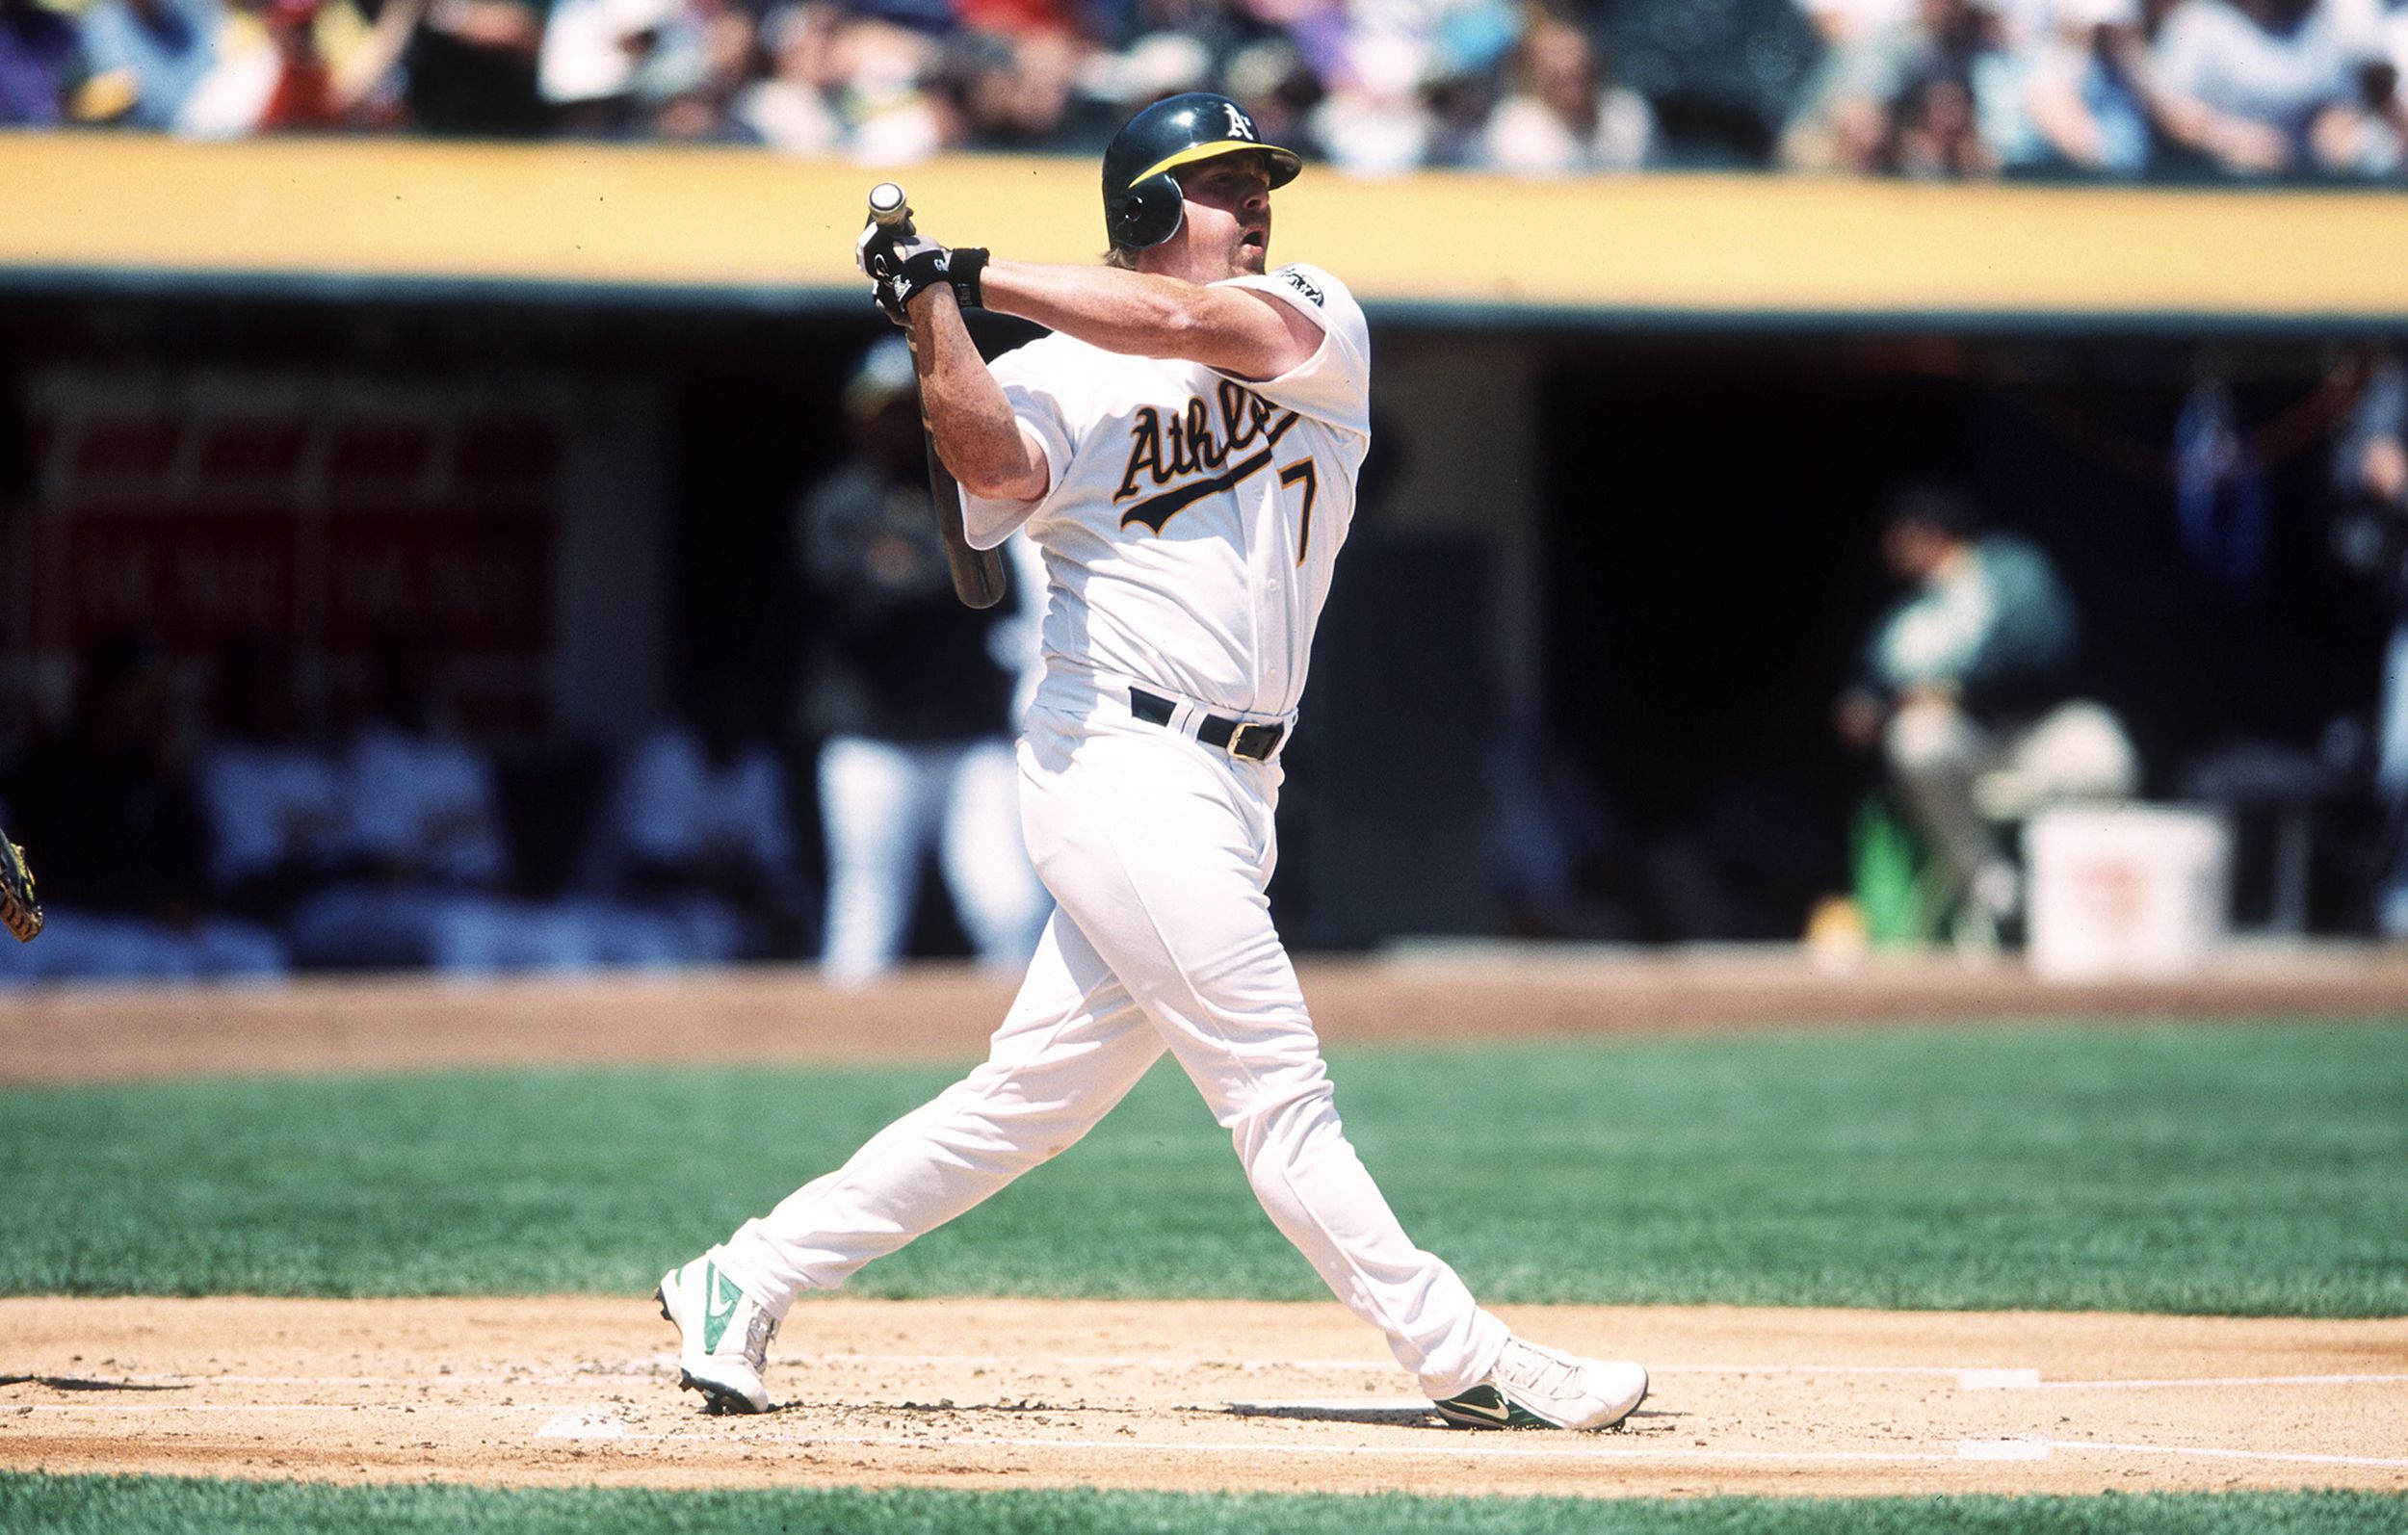 Jeremy Giambi, former Oakland Athletics player, died by suicide at